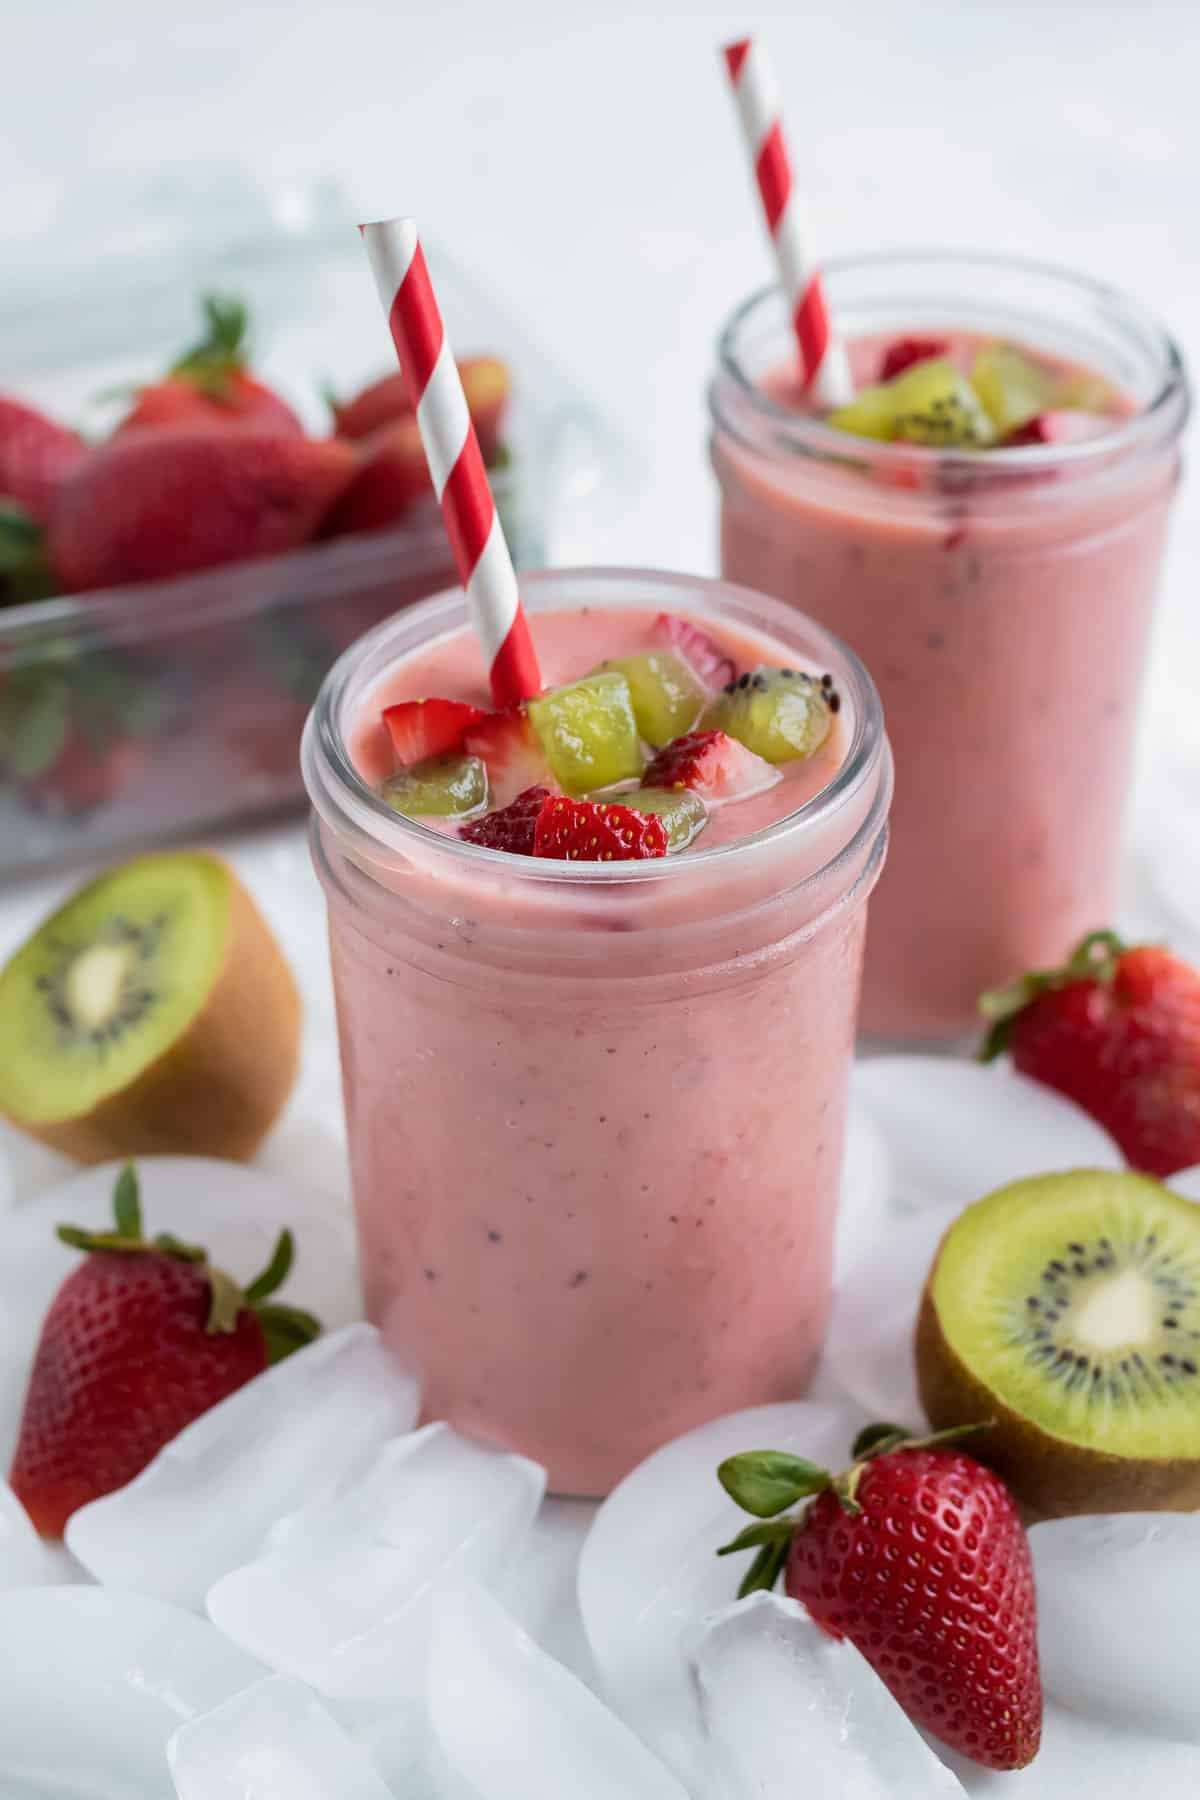 Easy strawberry kiwi smoothie is served for a cold, creamy drink.